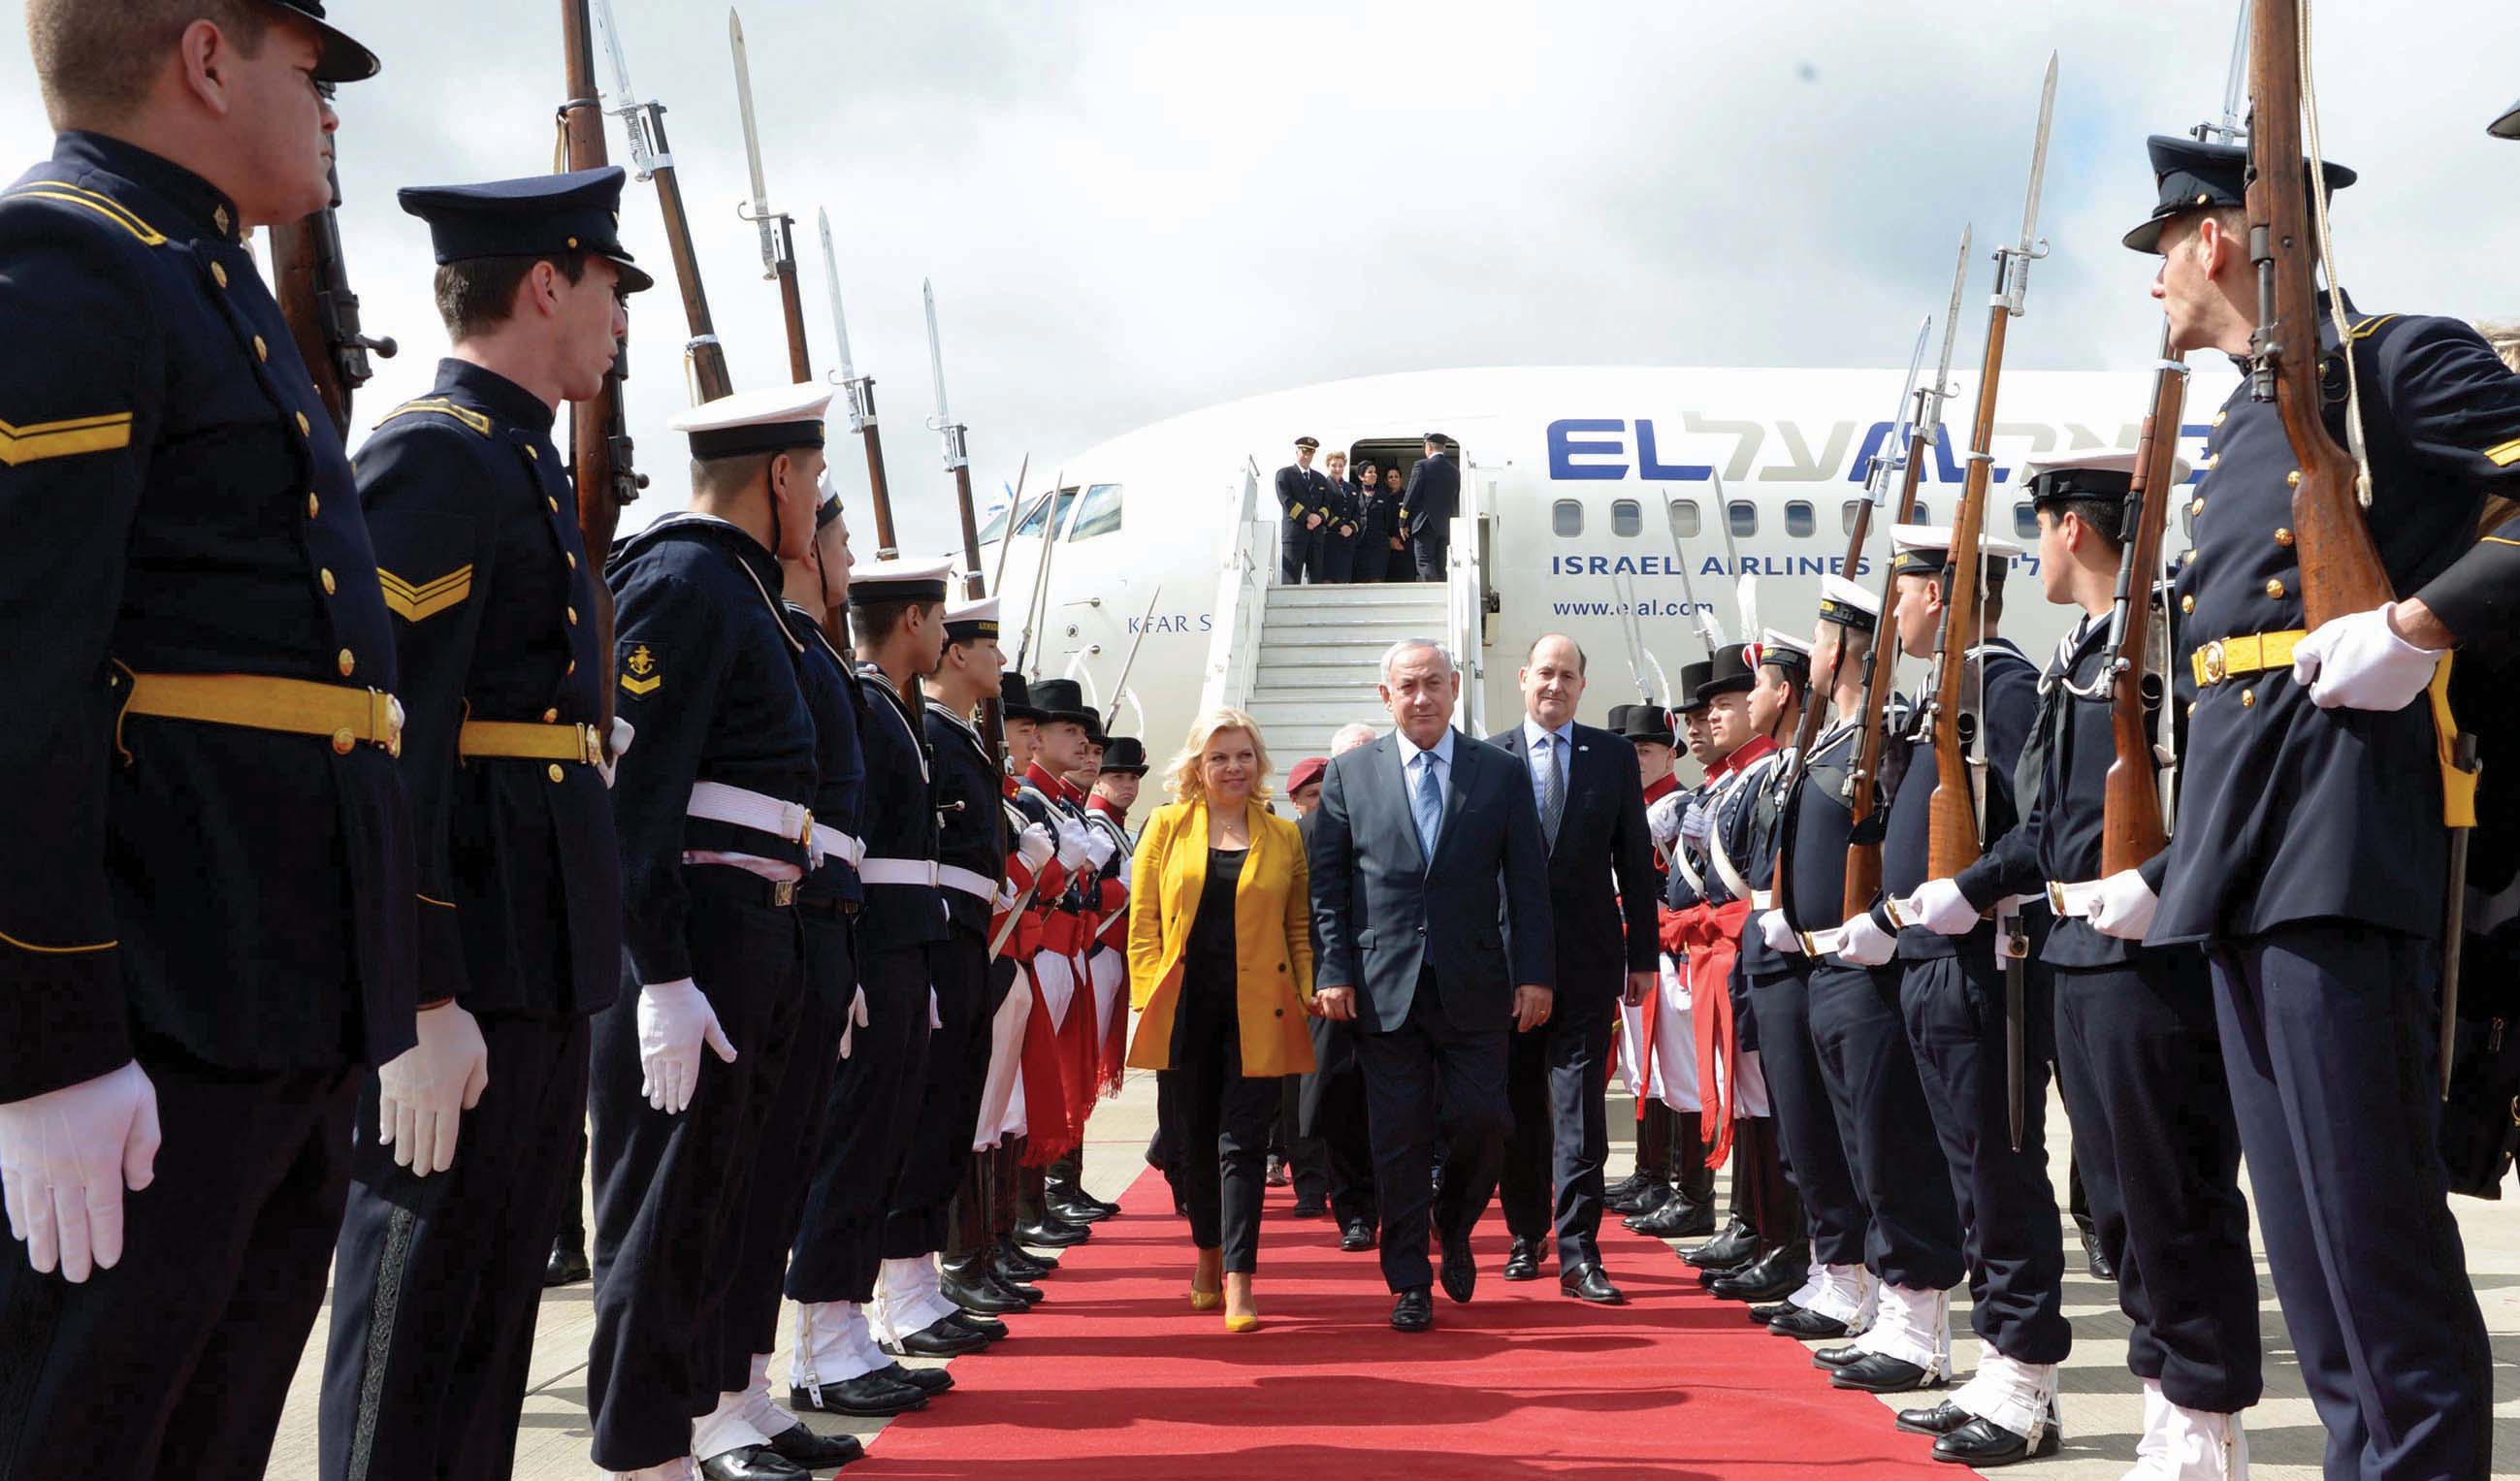 Israeli Prime Minister Benjamin Netanyahu and his wife Sara arrive to Buenos Aires, Argentina, on September 11, 2017, Israeli Prime Minister Benjamin Netanyahu is on a 10 days visit to Latin America and the United states. Photo by Avi Ohayon/GPO